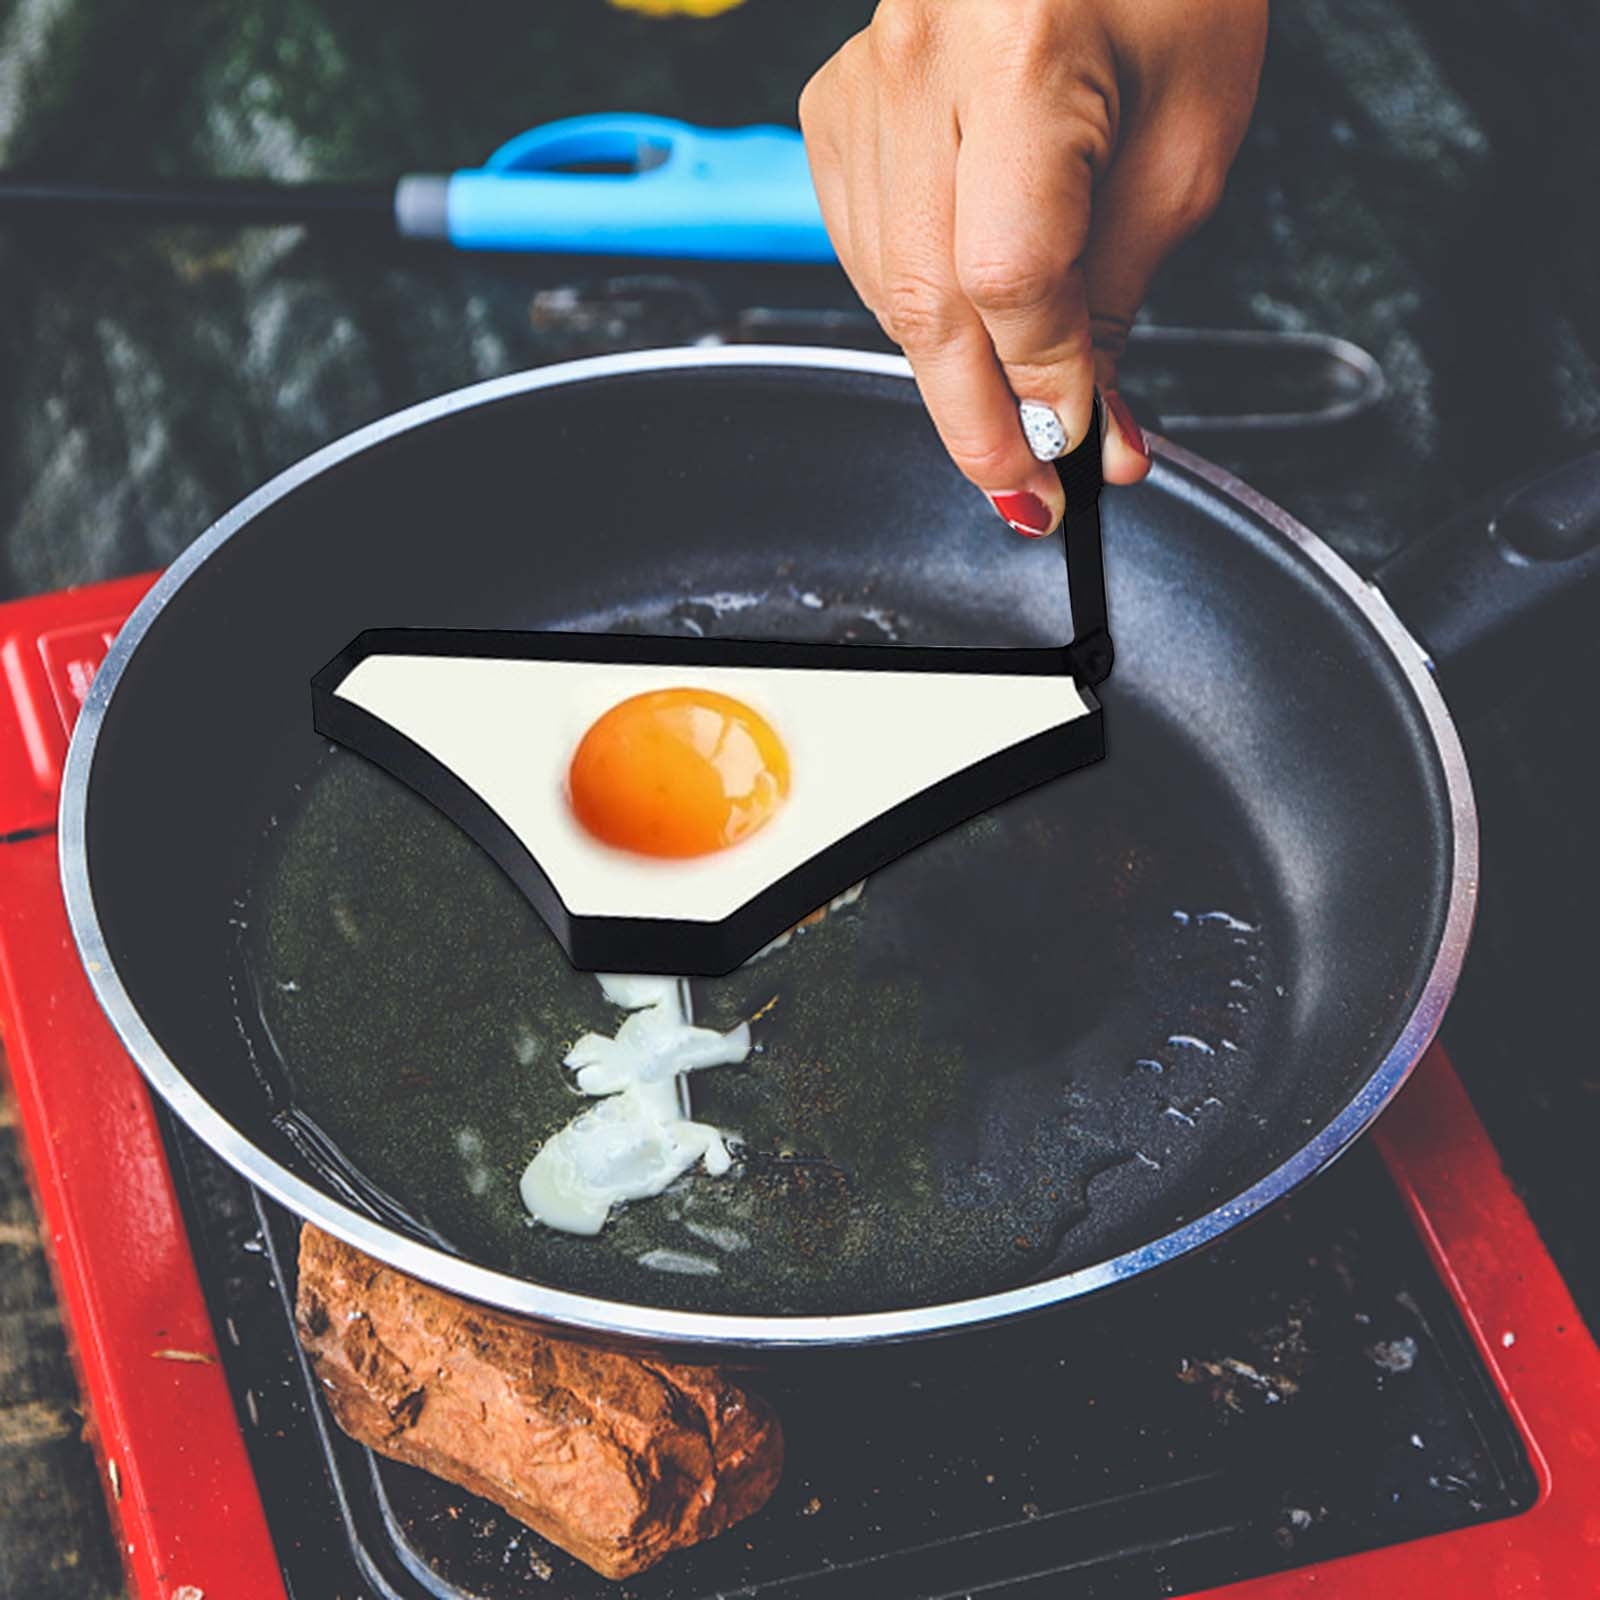 Gifts Cntydi Kitchen Utensils & Gadgets New Eggs Fryer Single Party Funny,  Non Stick Eggs Frying Kitchen Eggs Frying Gadget Funny Props 